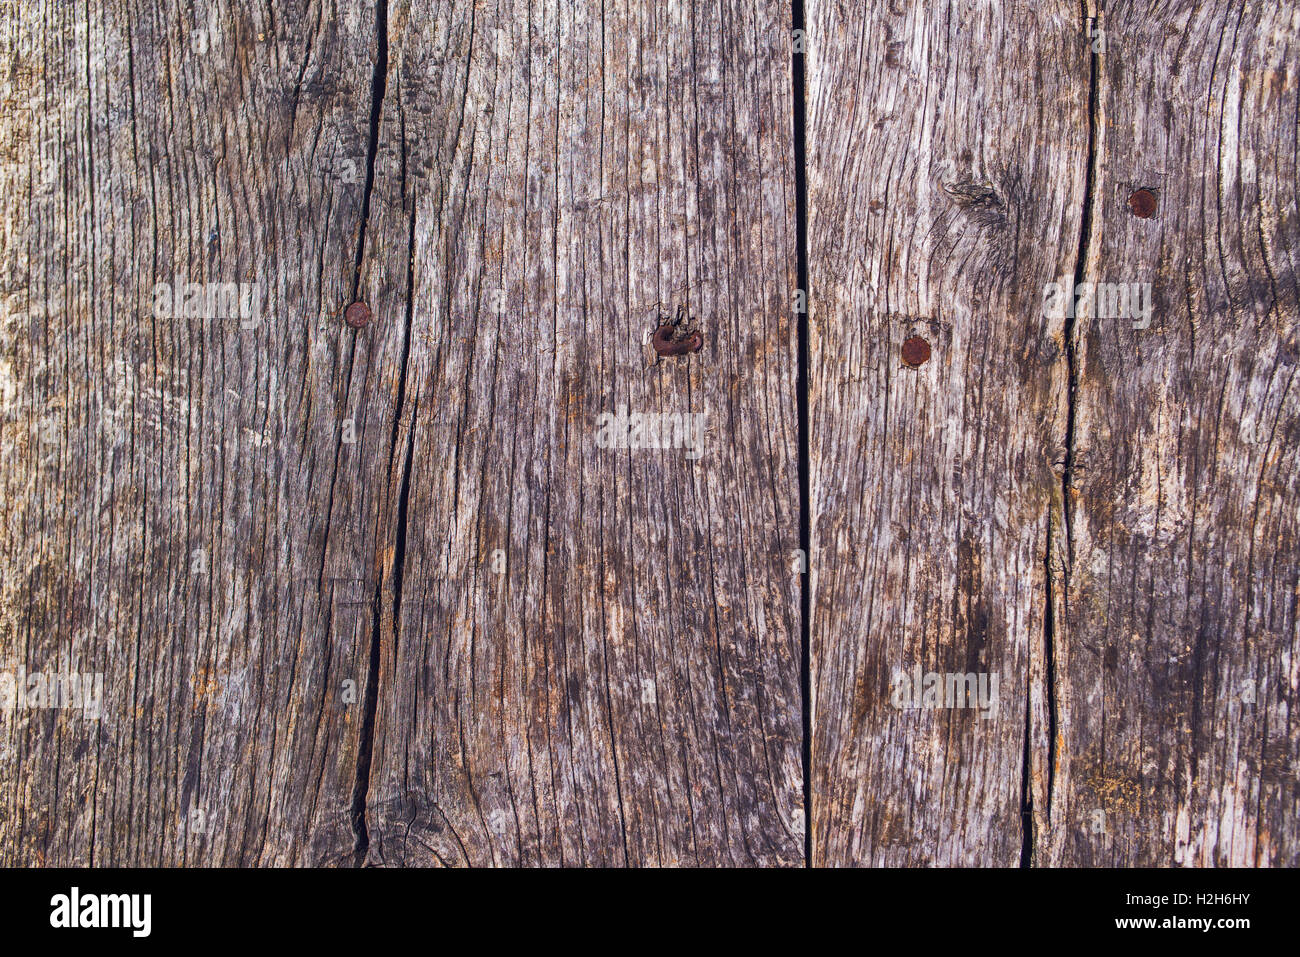 Rustic wooden surface with rusty nails, top view Stock Photo